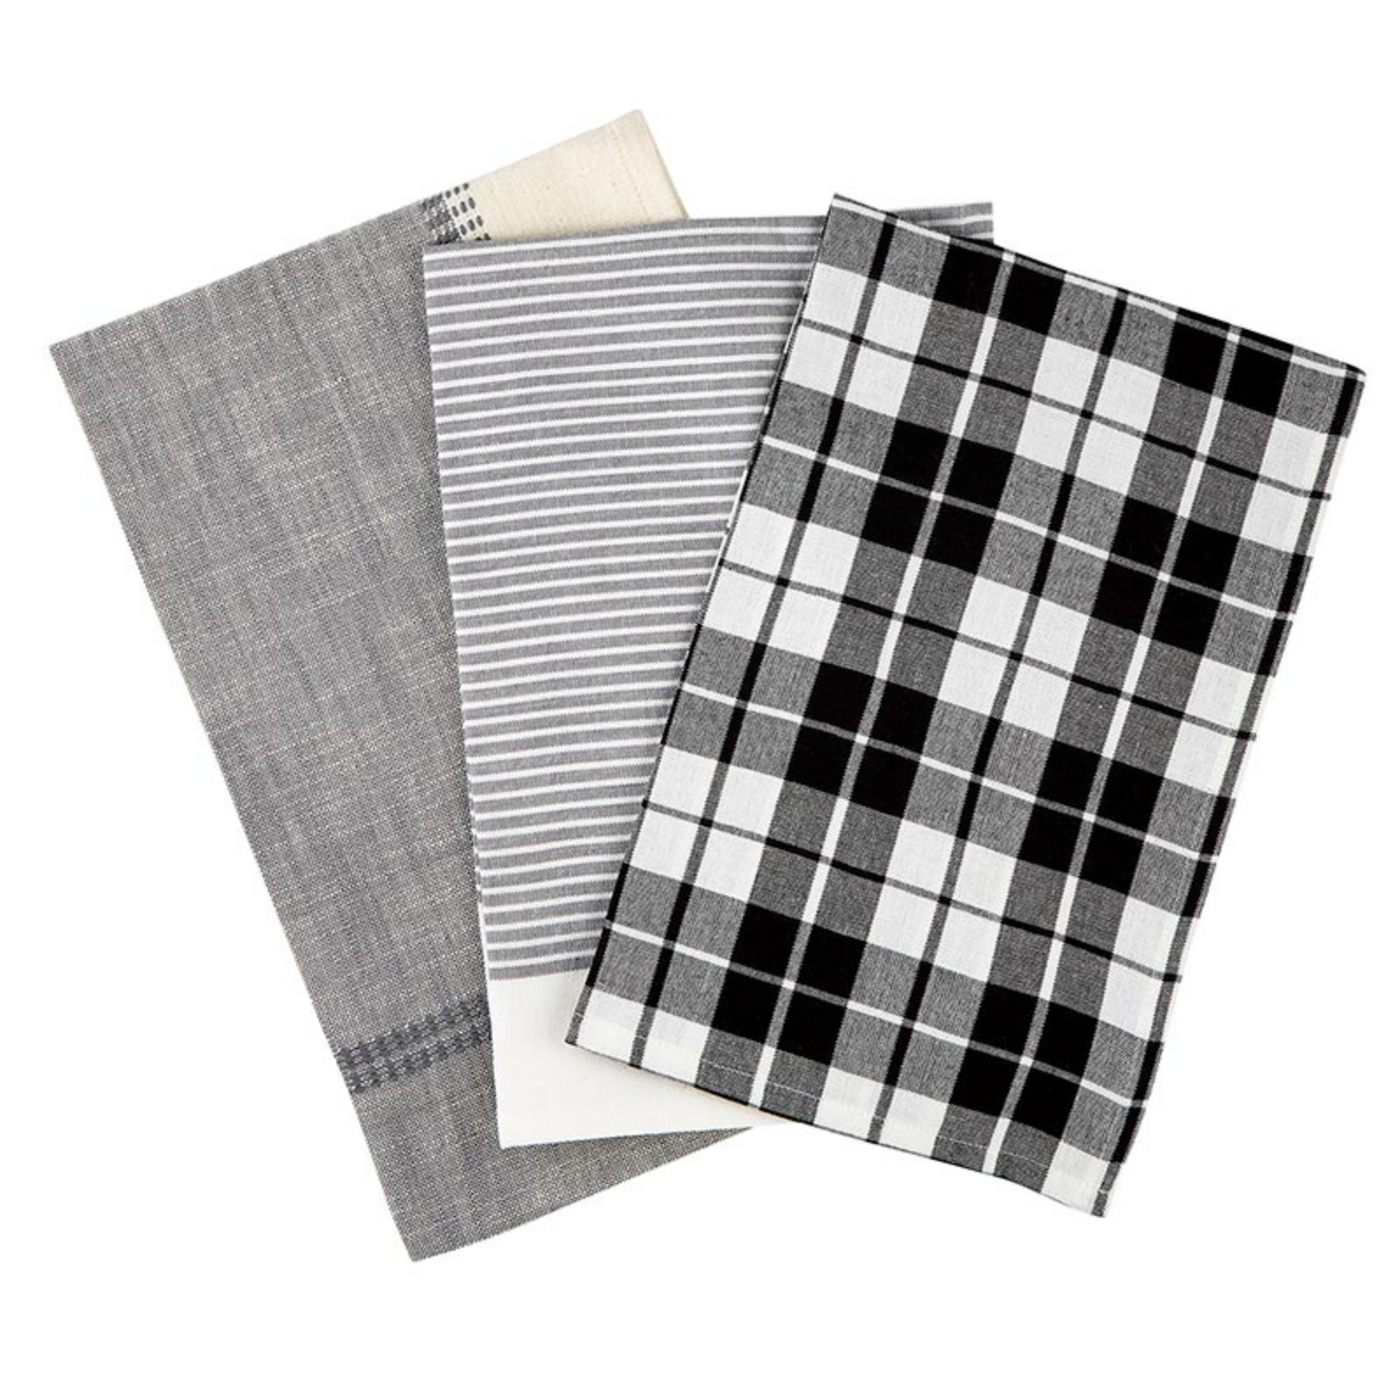 Kitchen Towel Set in Grey and Black